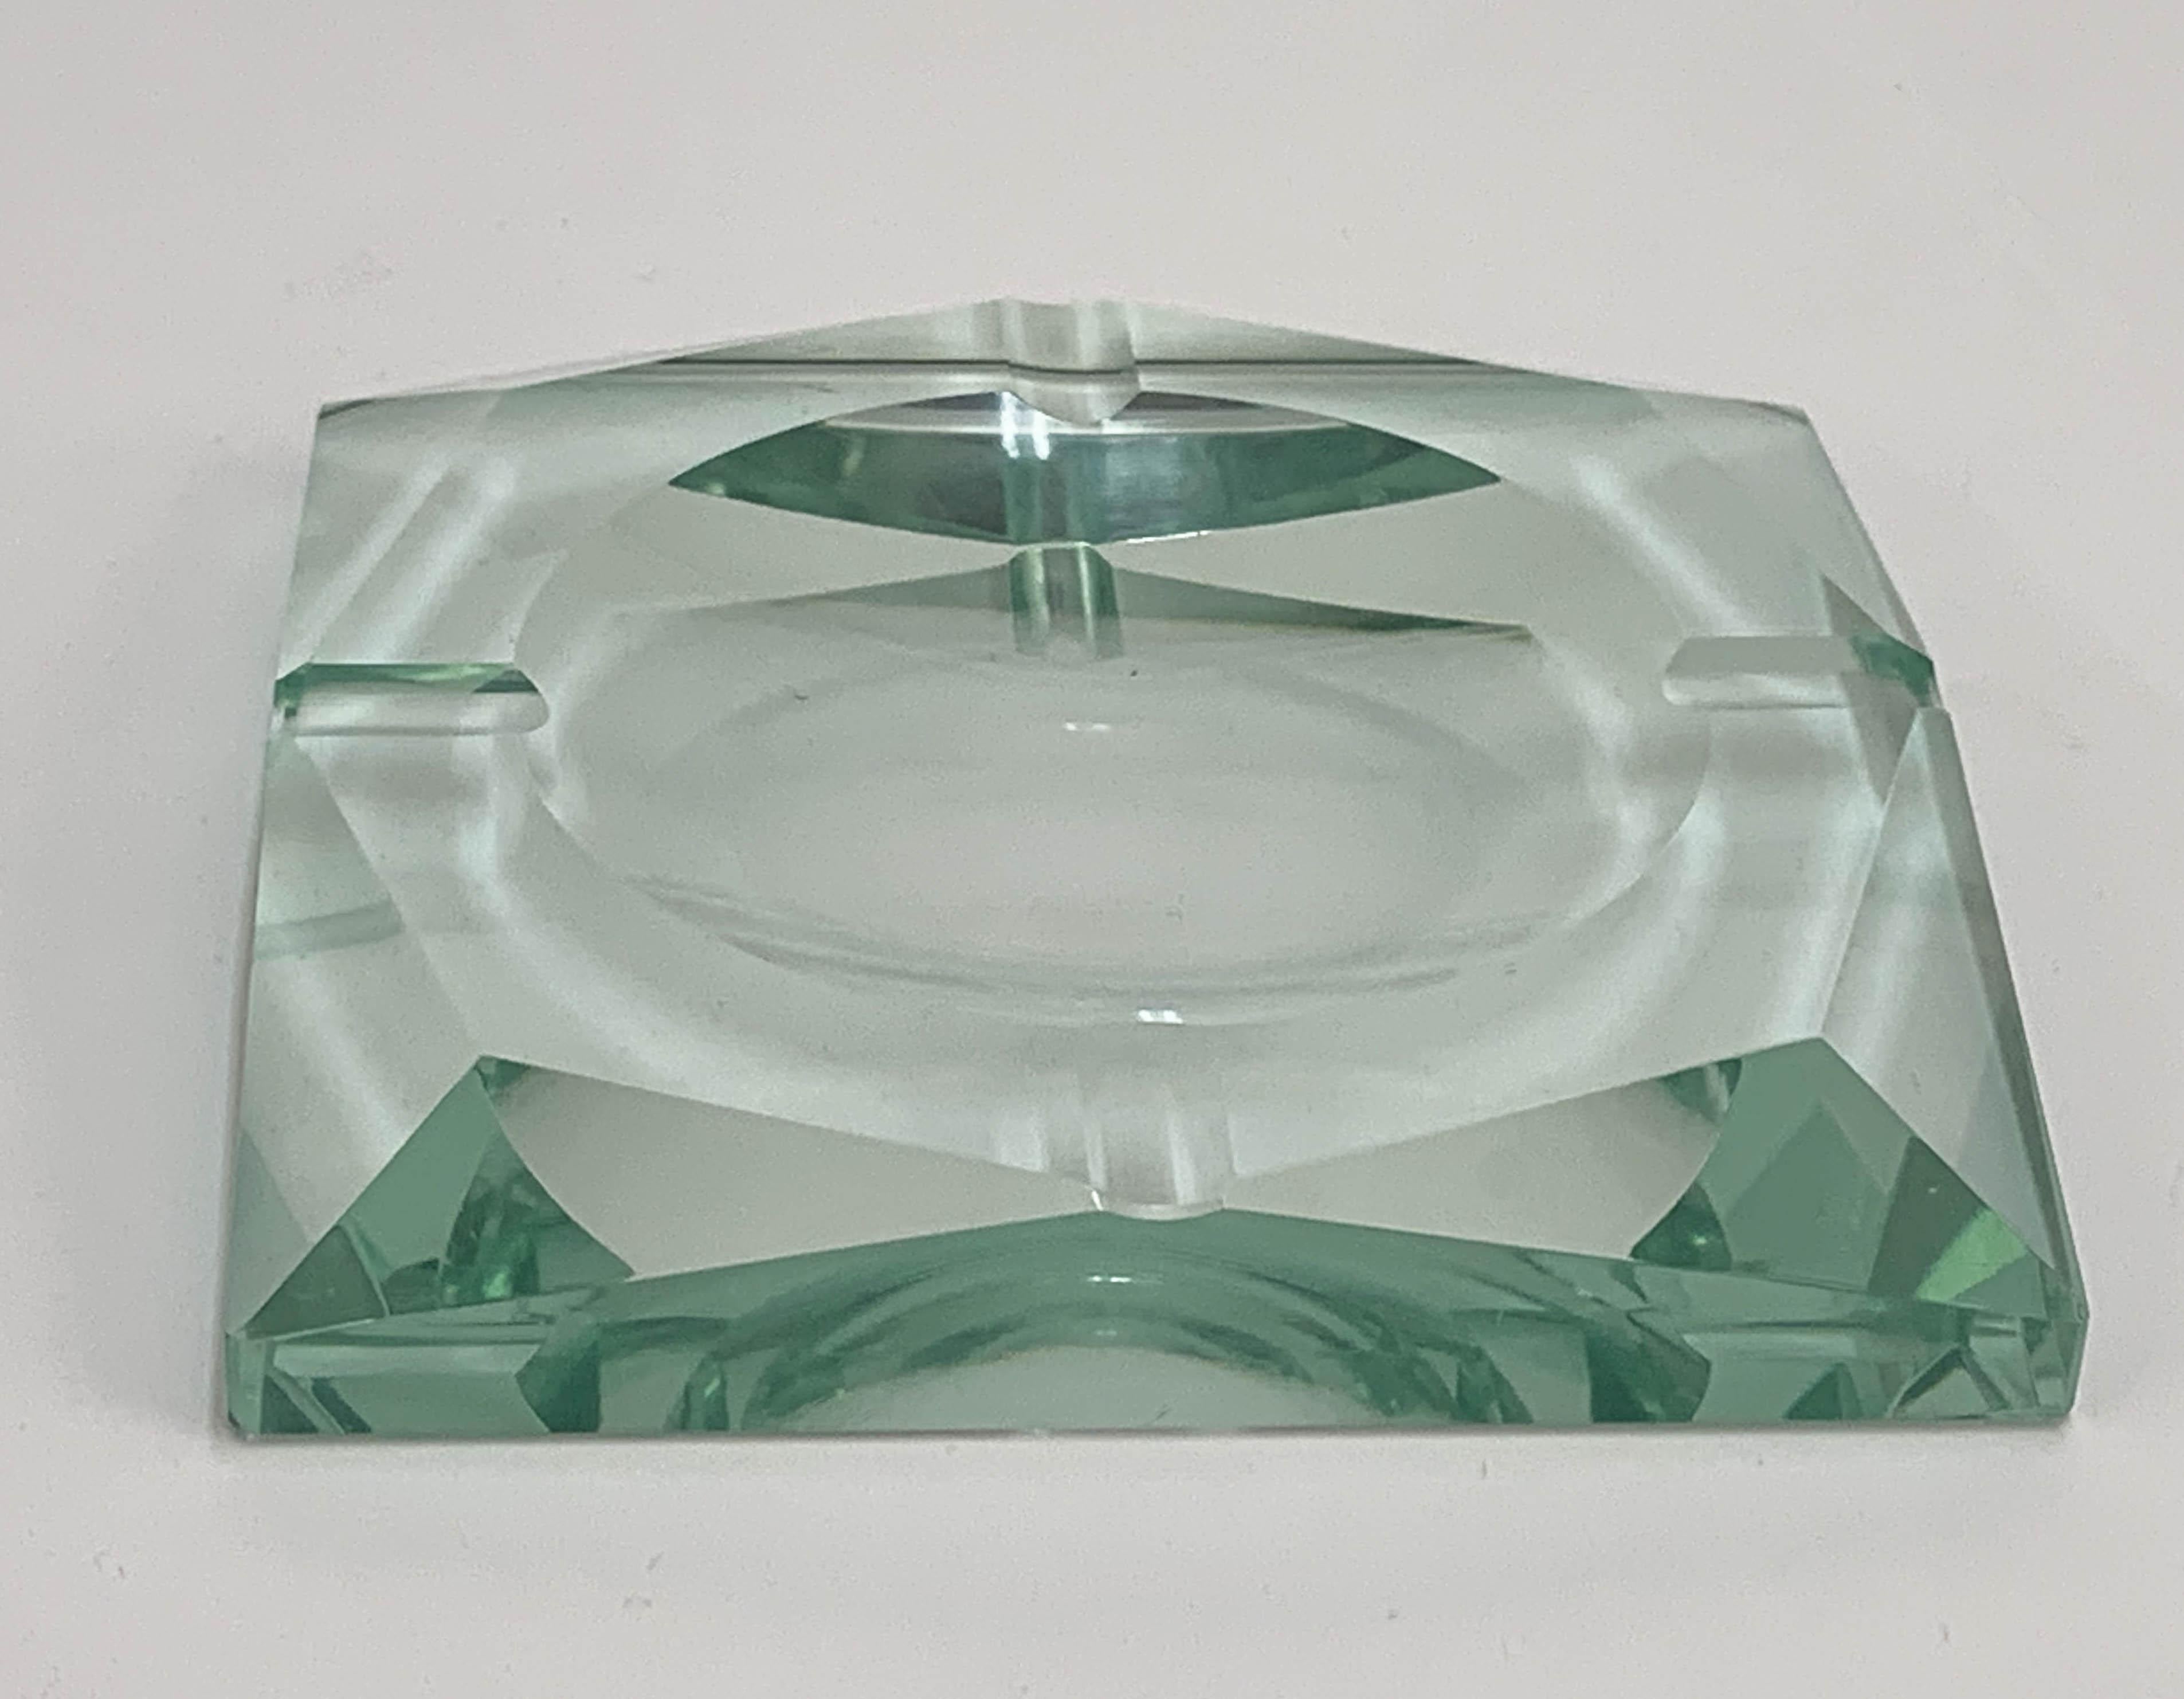 Amazing Mid-Century Modern green glass squared ashtray. This wonderful piece was produced by Fontana Arte in Italy during 1960s.

The item is in squared green glass with geometrical carving, a Classic design by Fontana Arte from the 1960s.

This